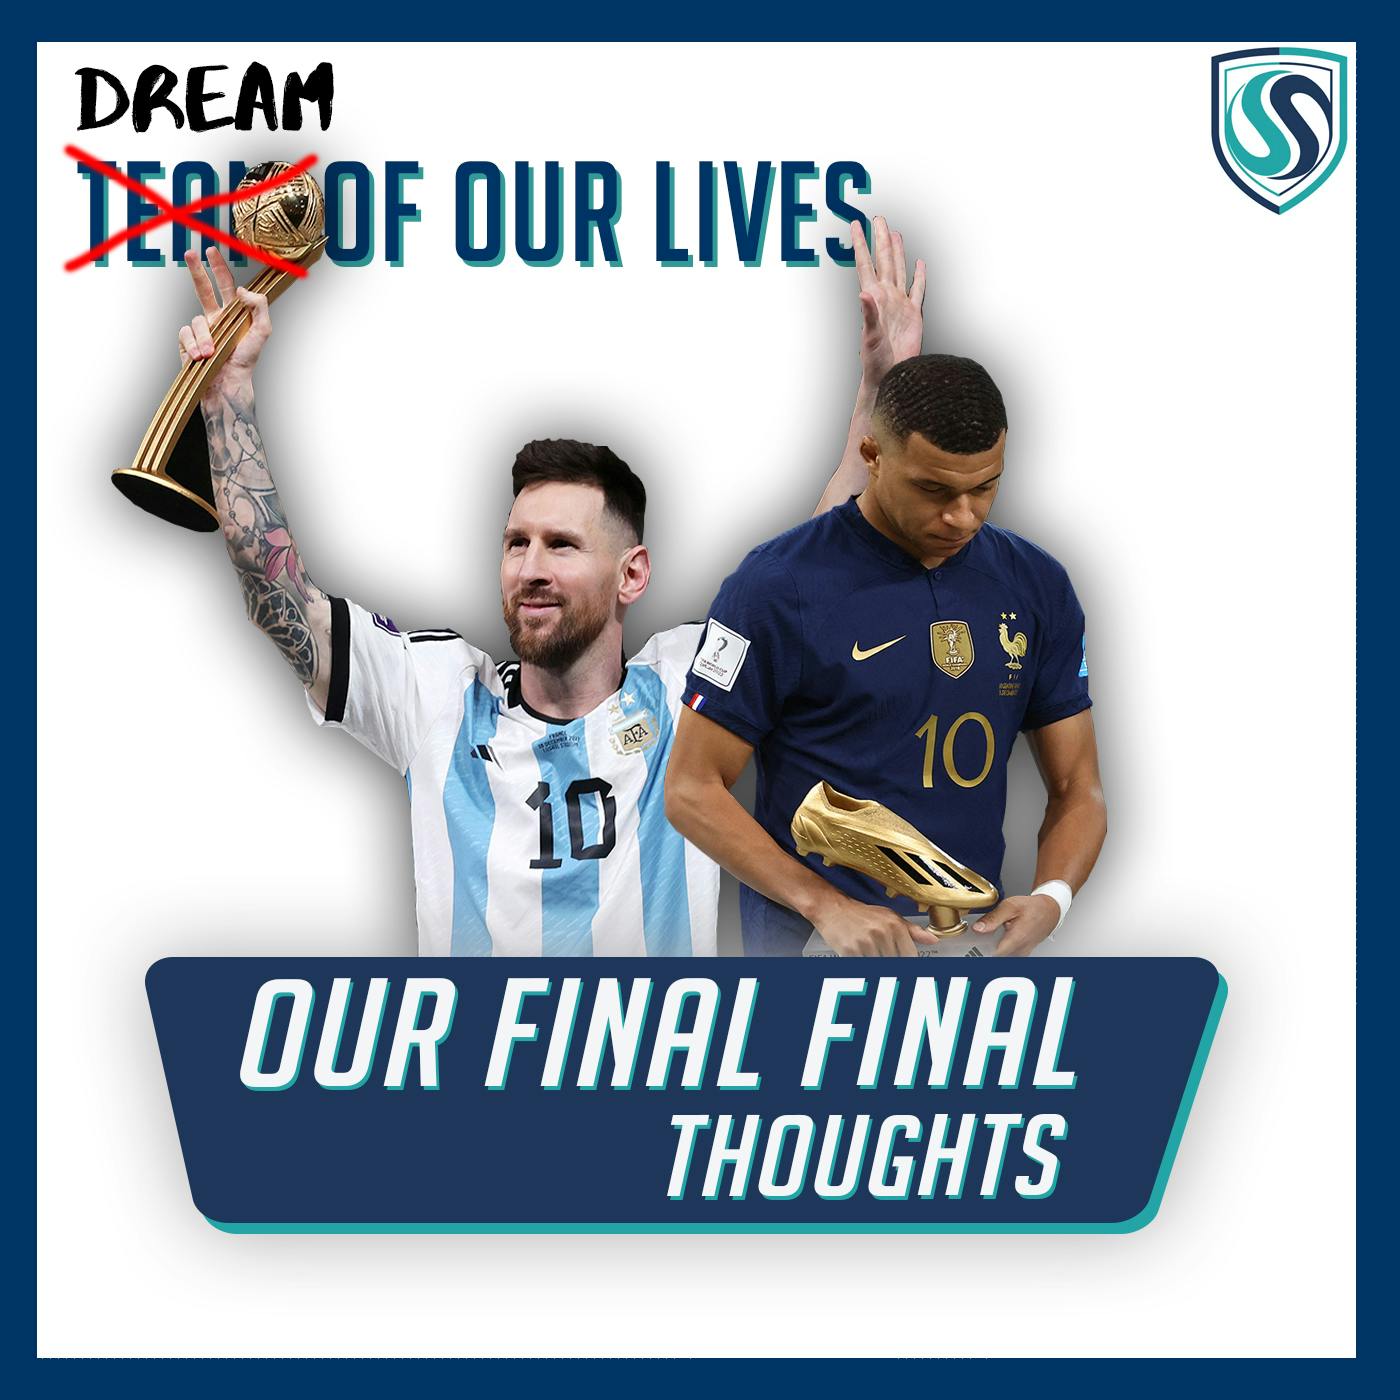 Dream of our Lives: Our Final, Final Thoughts!